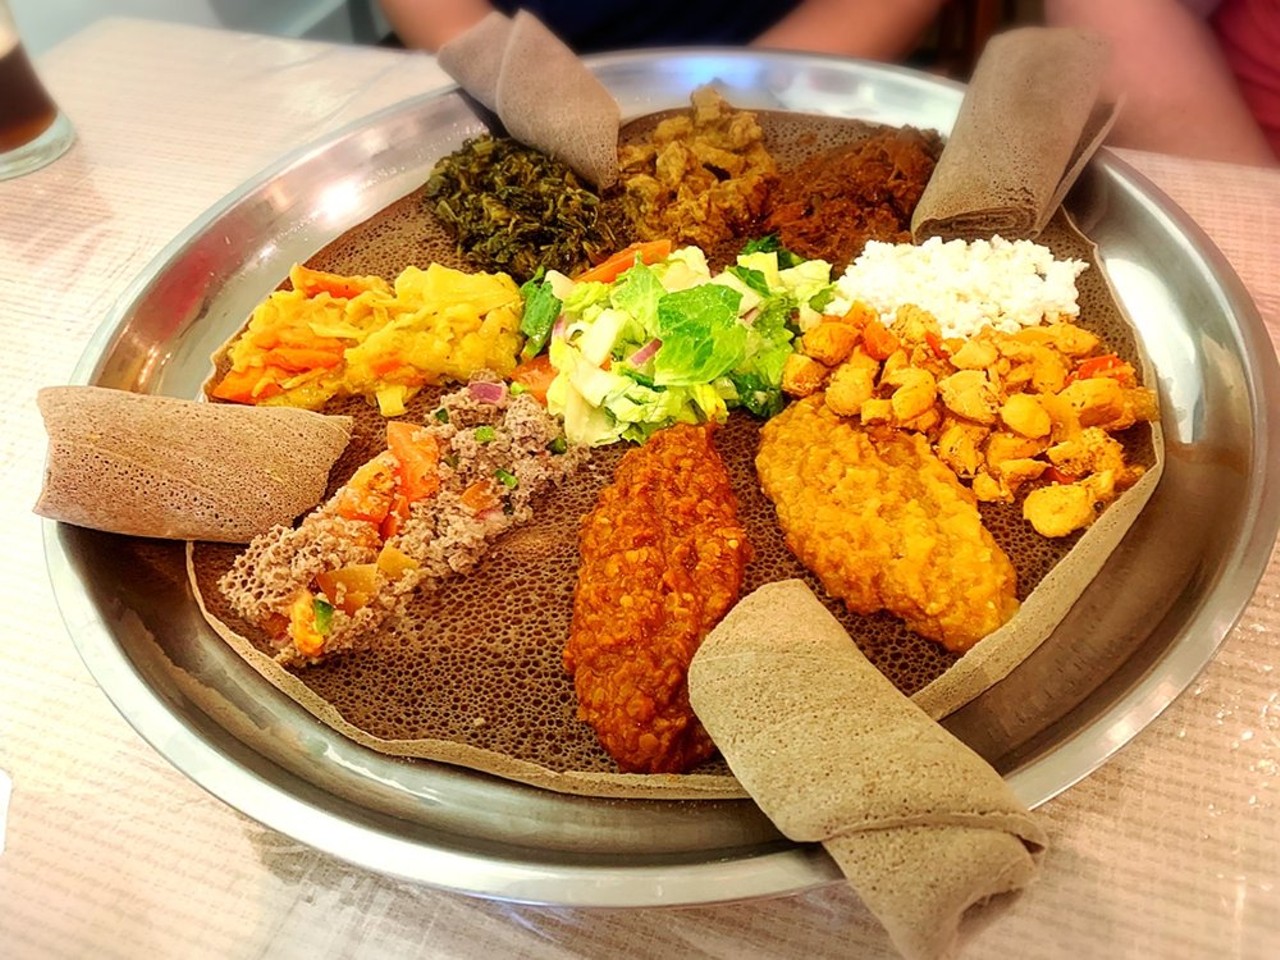 65. Selam Ethiopian & Eritrean Cuisine5494 Central Florida Parkway
"This place was amazing. New to Ethiopian/Eritrean food, they were accommodating and explained things several times. Their own herbal tea blend beat any of the expensive blends I buy at Megacon lol. We got the giant sharable sampler and it was the best choice." - Dakota C